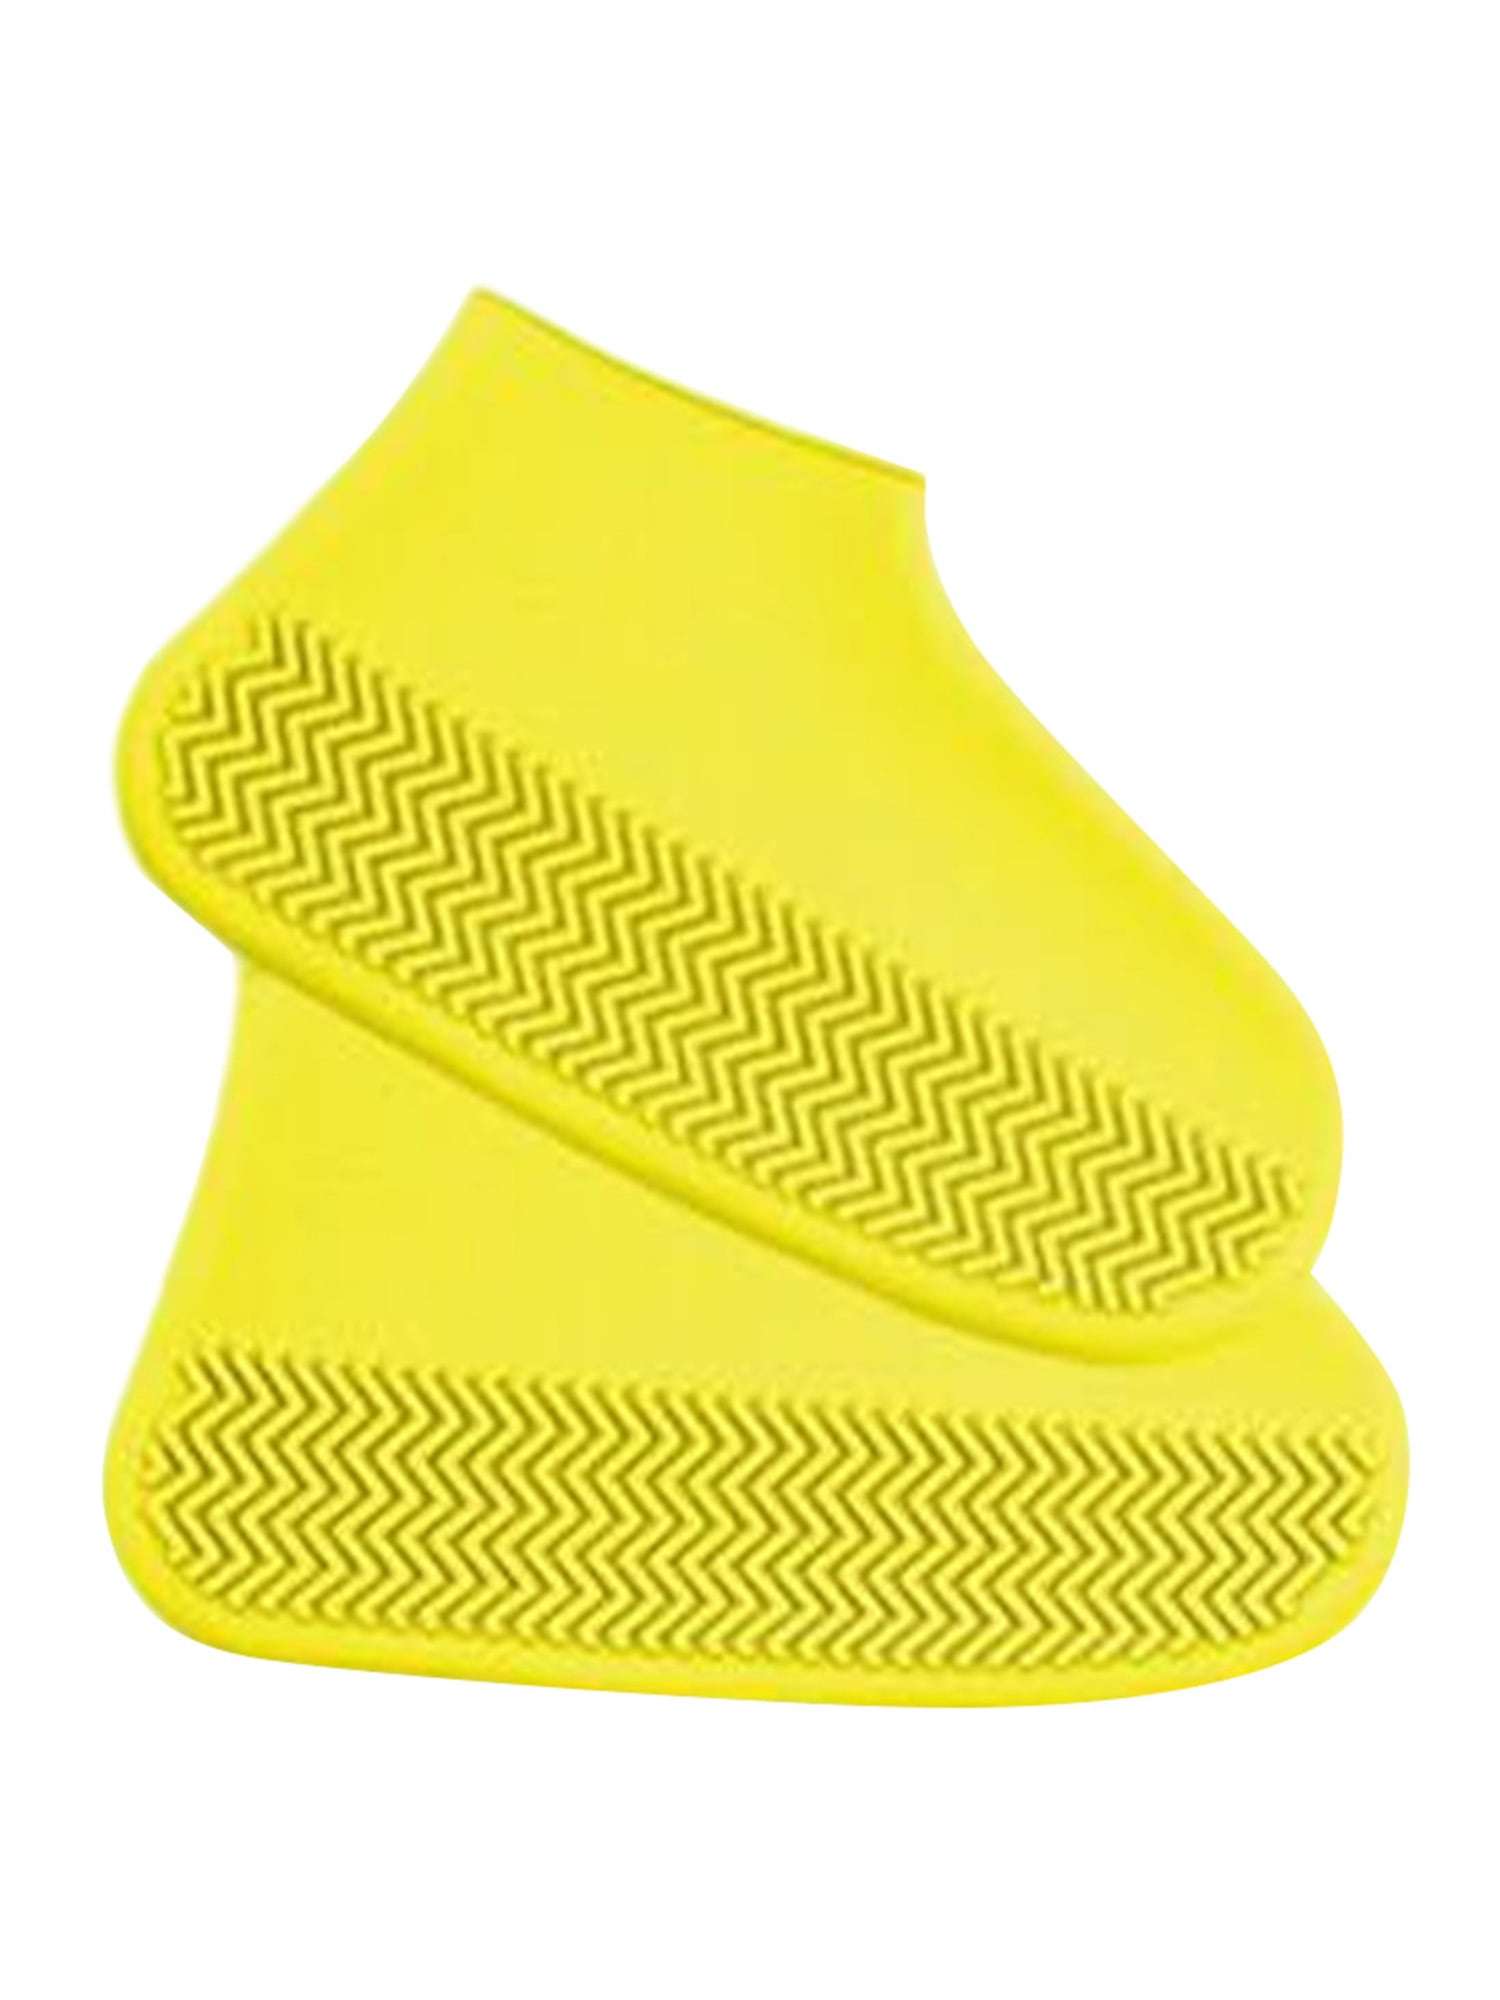 New Covers Accessories Slip-resistant Boot  Rubber Overshoes Latex Rain Shoes 